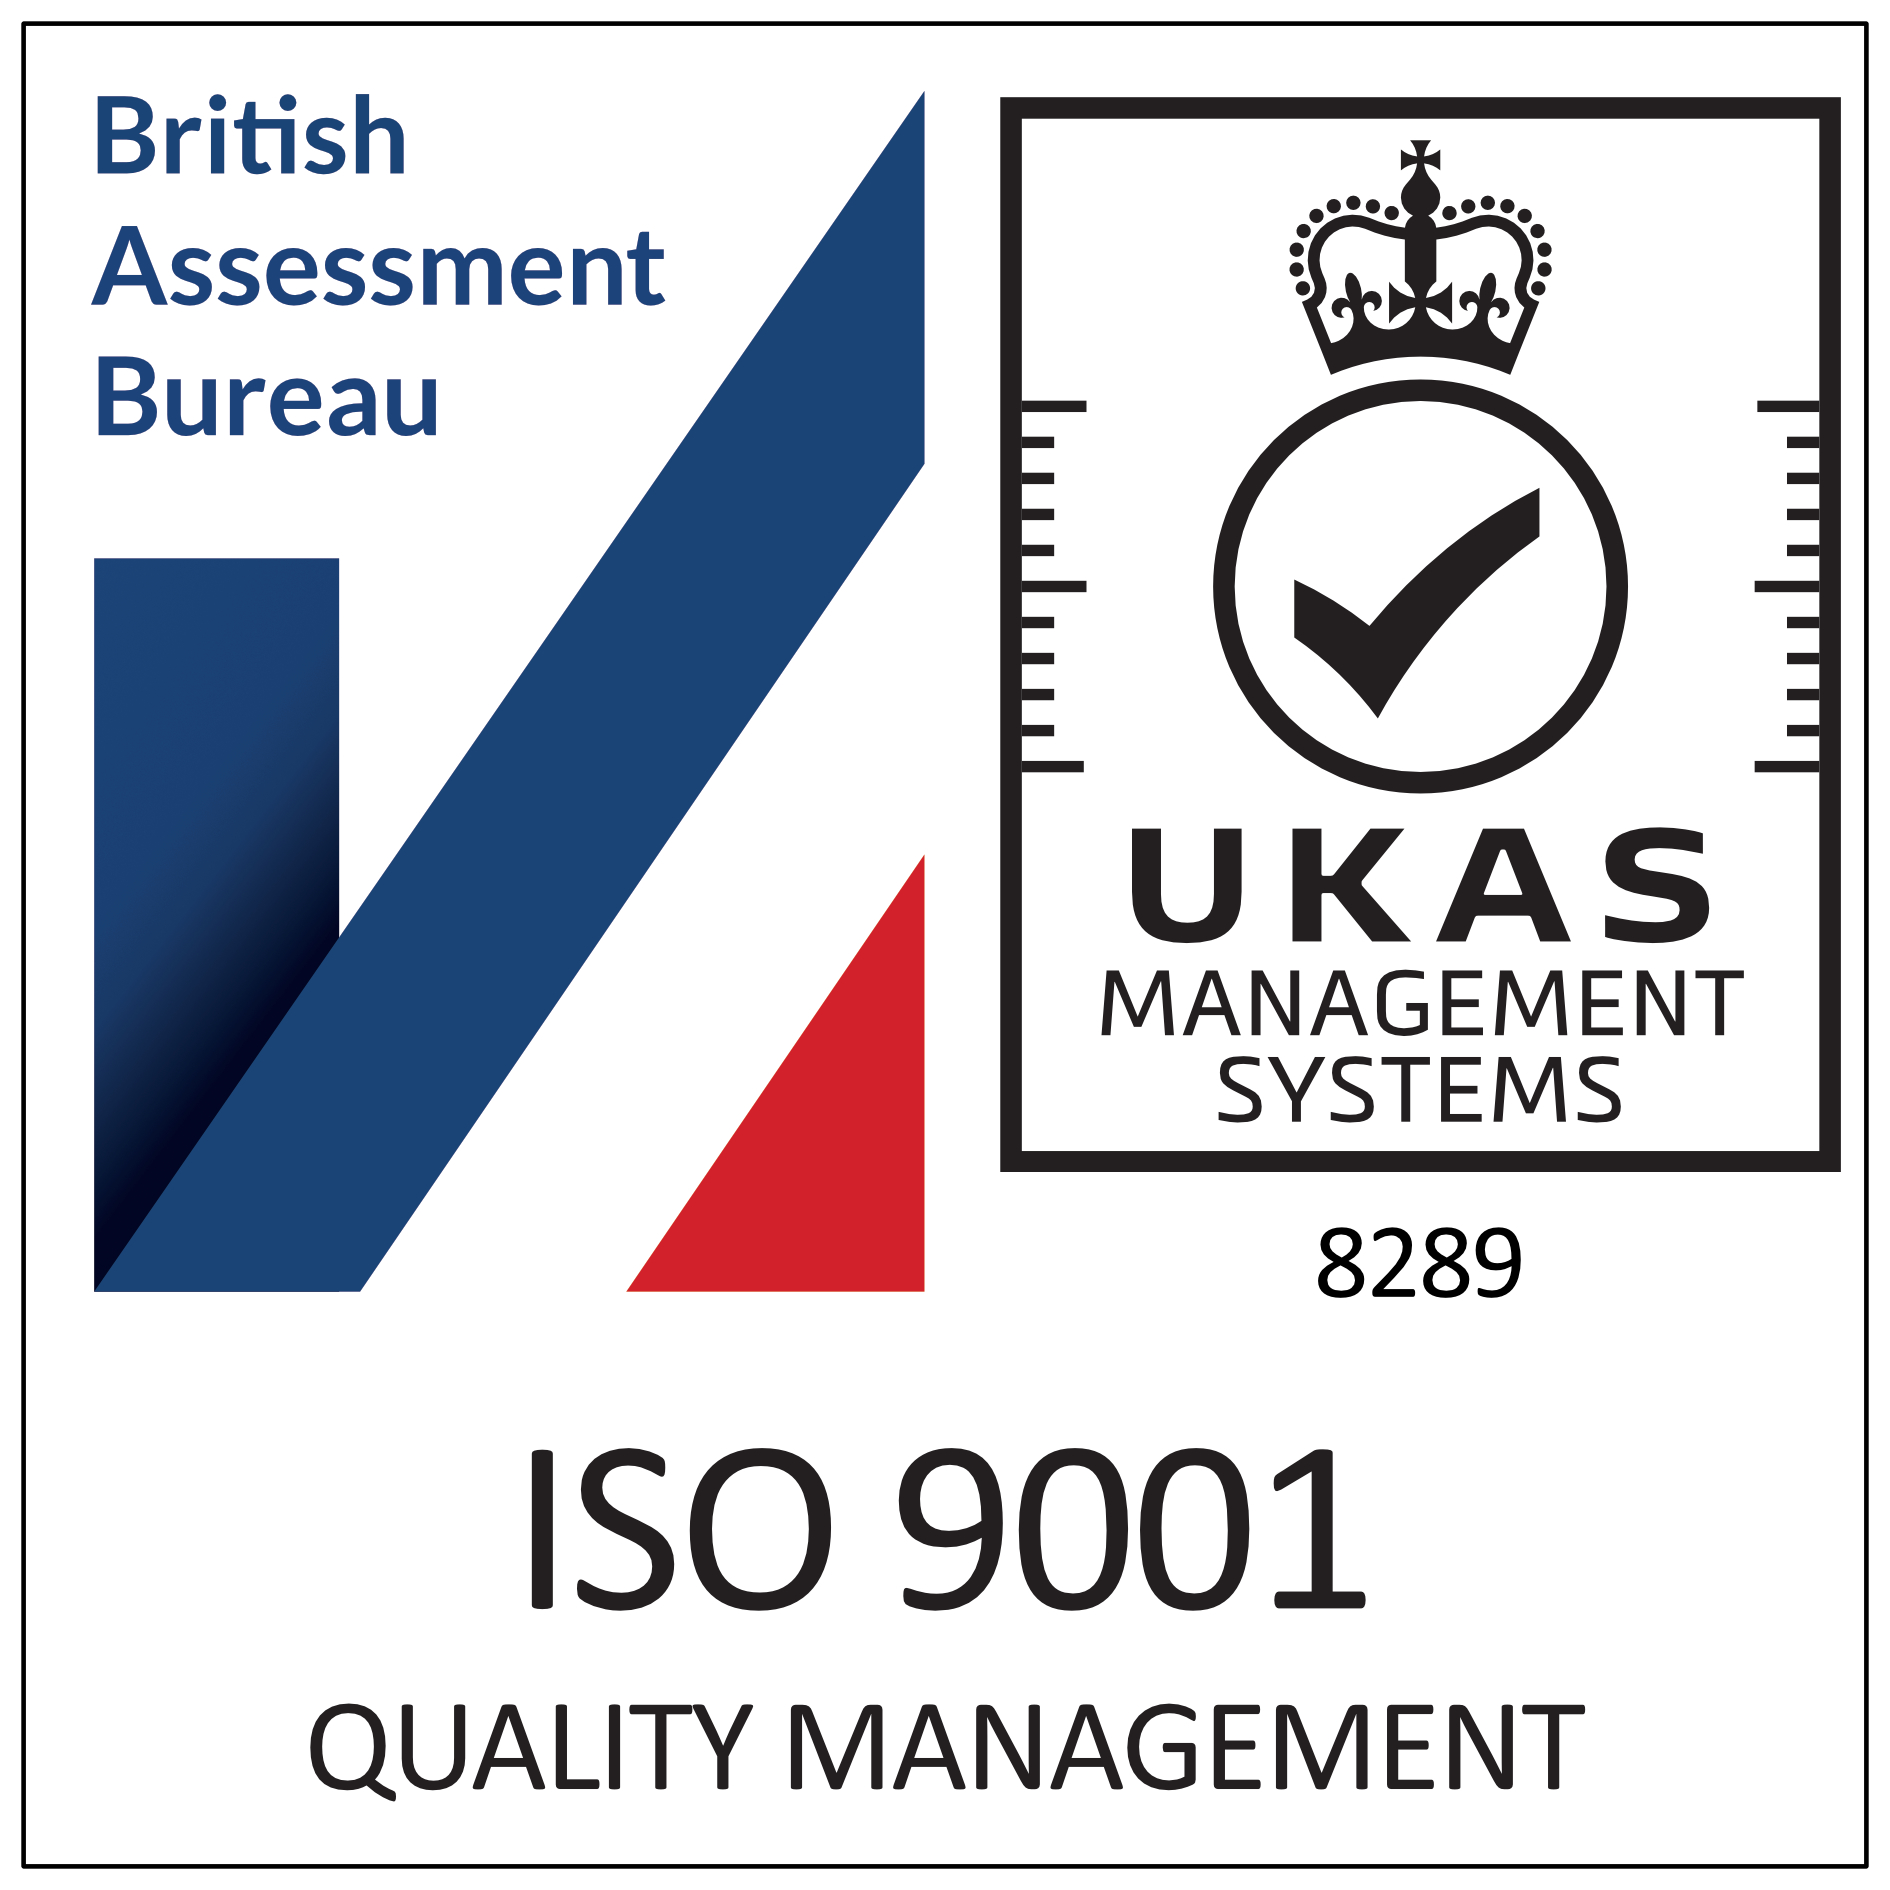 Cardiff, Wales, United Kingdom의 Plus Your Business 에이전시는 ISO 9001 certified 수상 경력이 있습니다